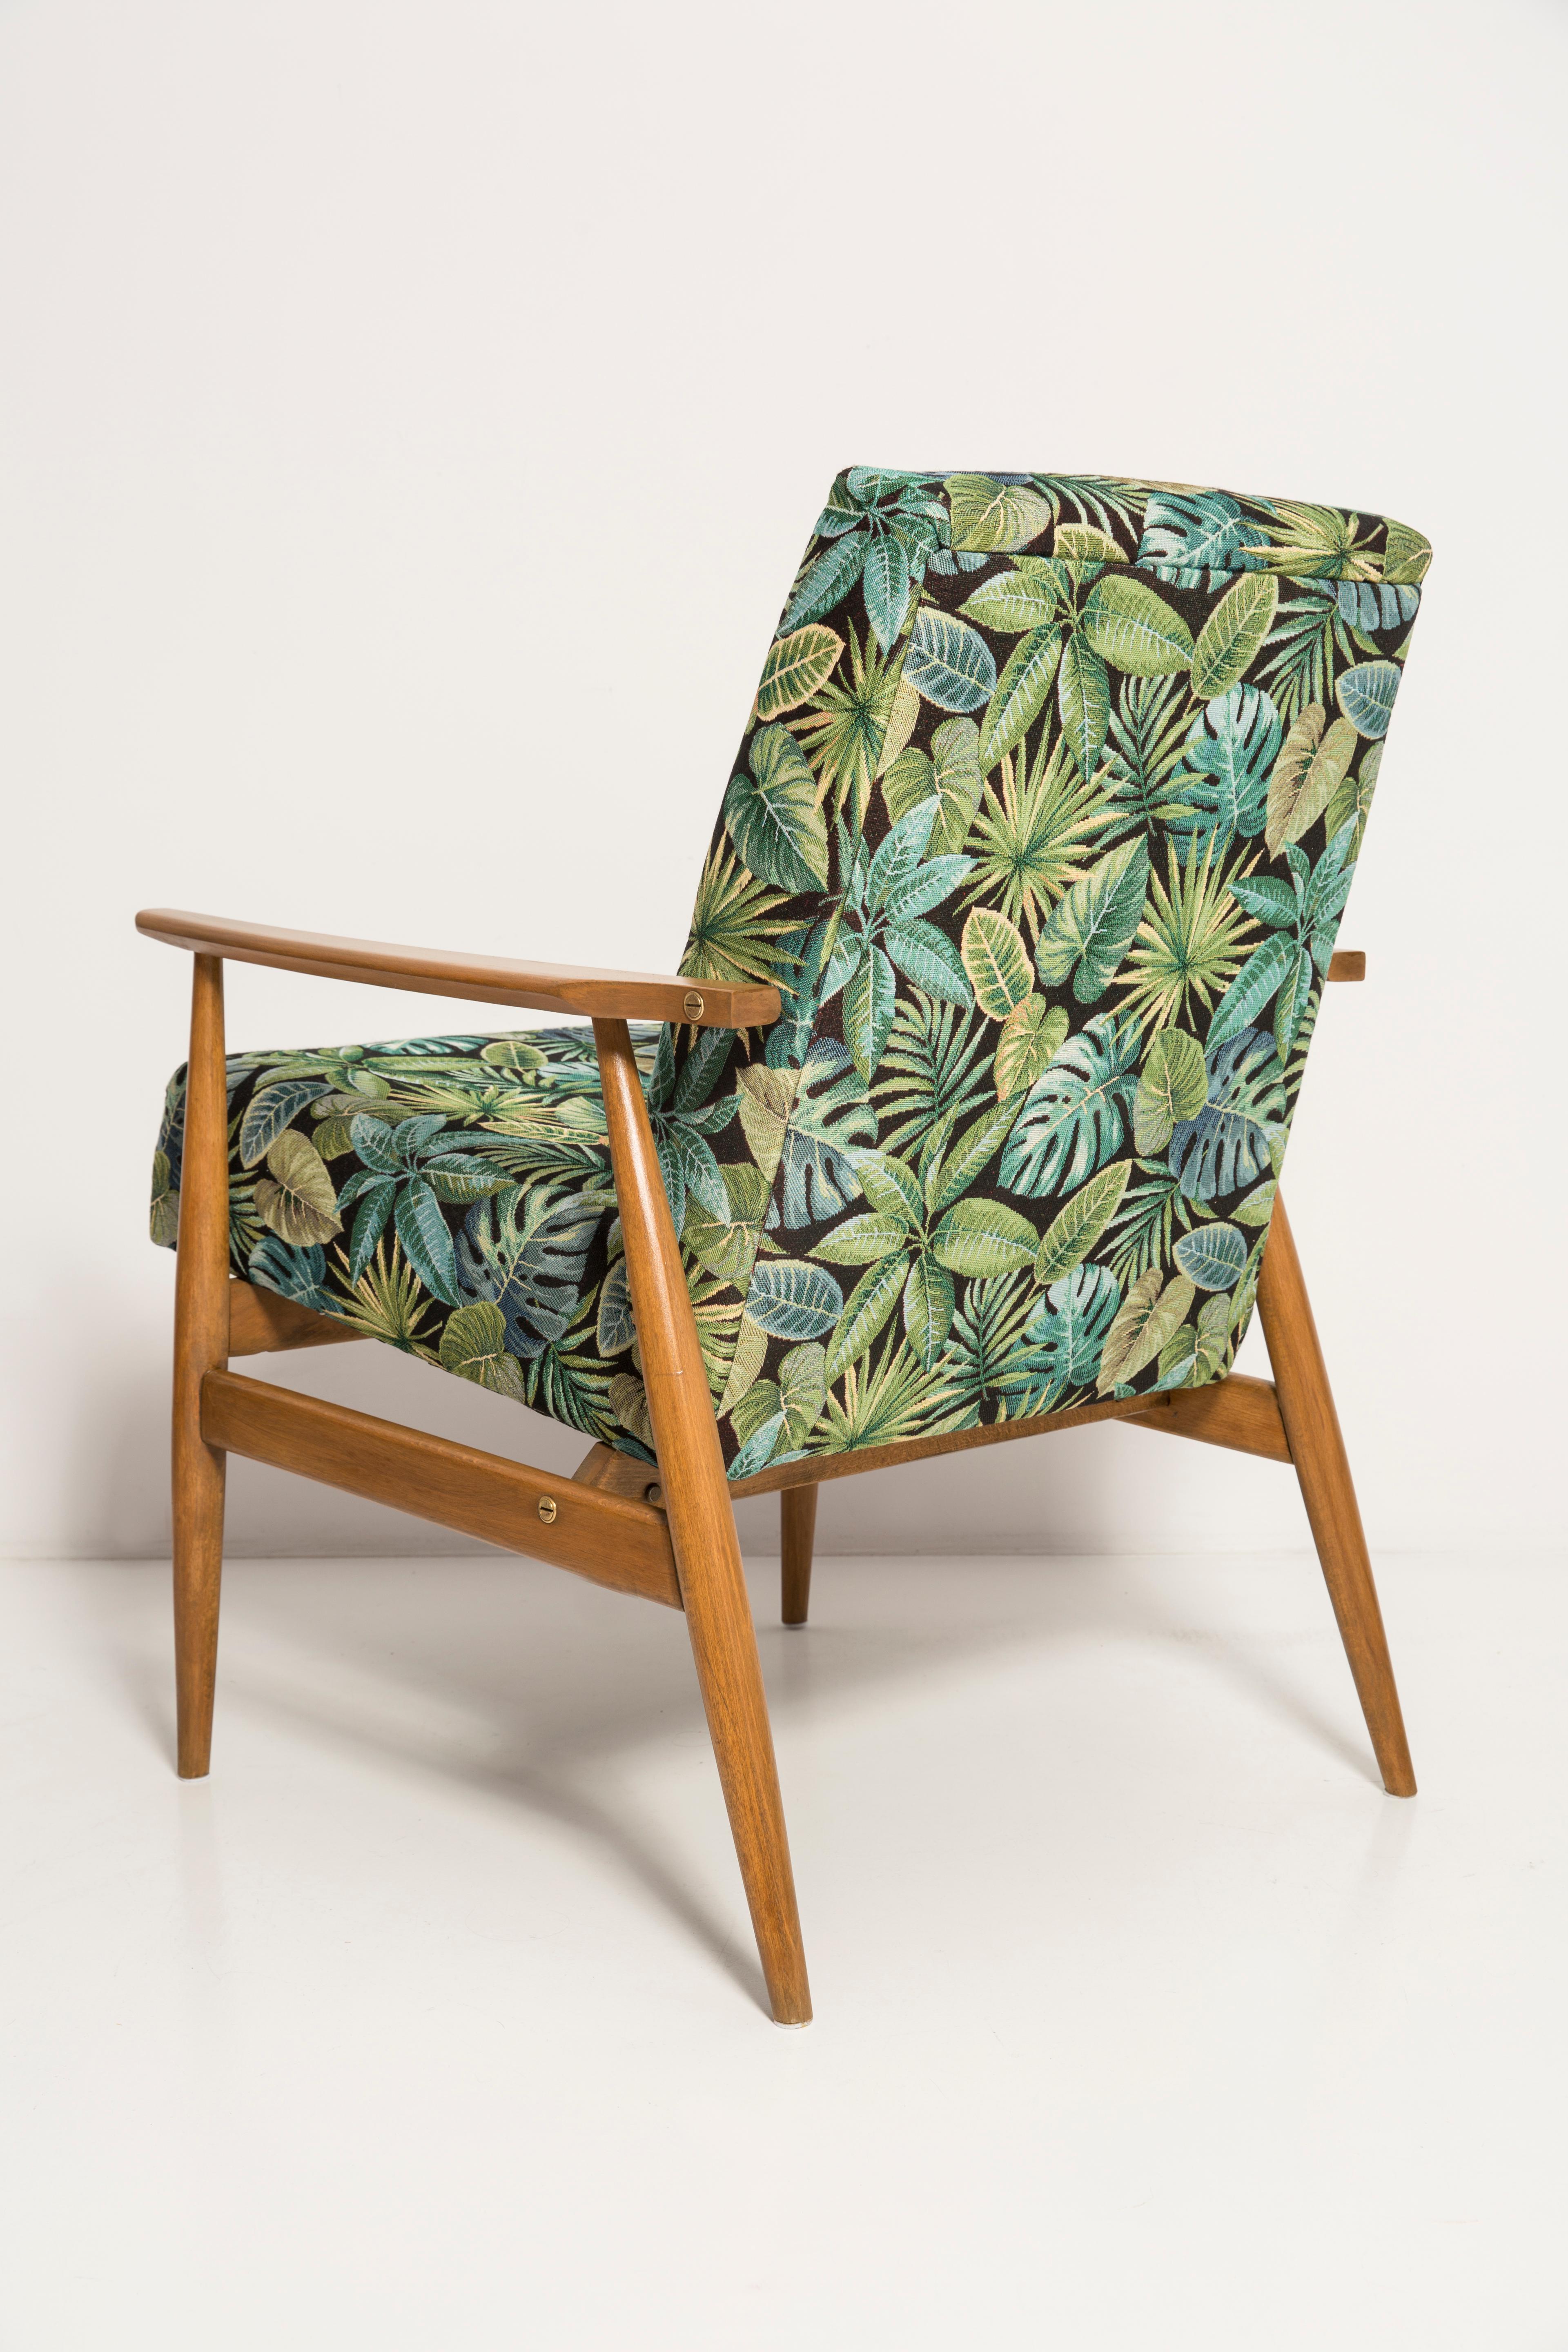 Mid-Century Green Leaves Jacquard Dante Armchair, H. Lis, 1960s For Sale 6